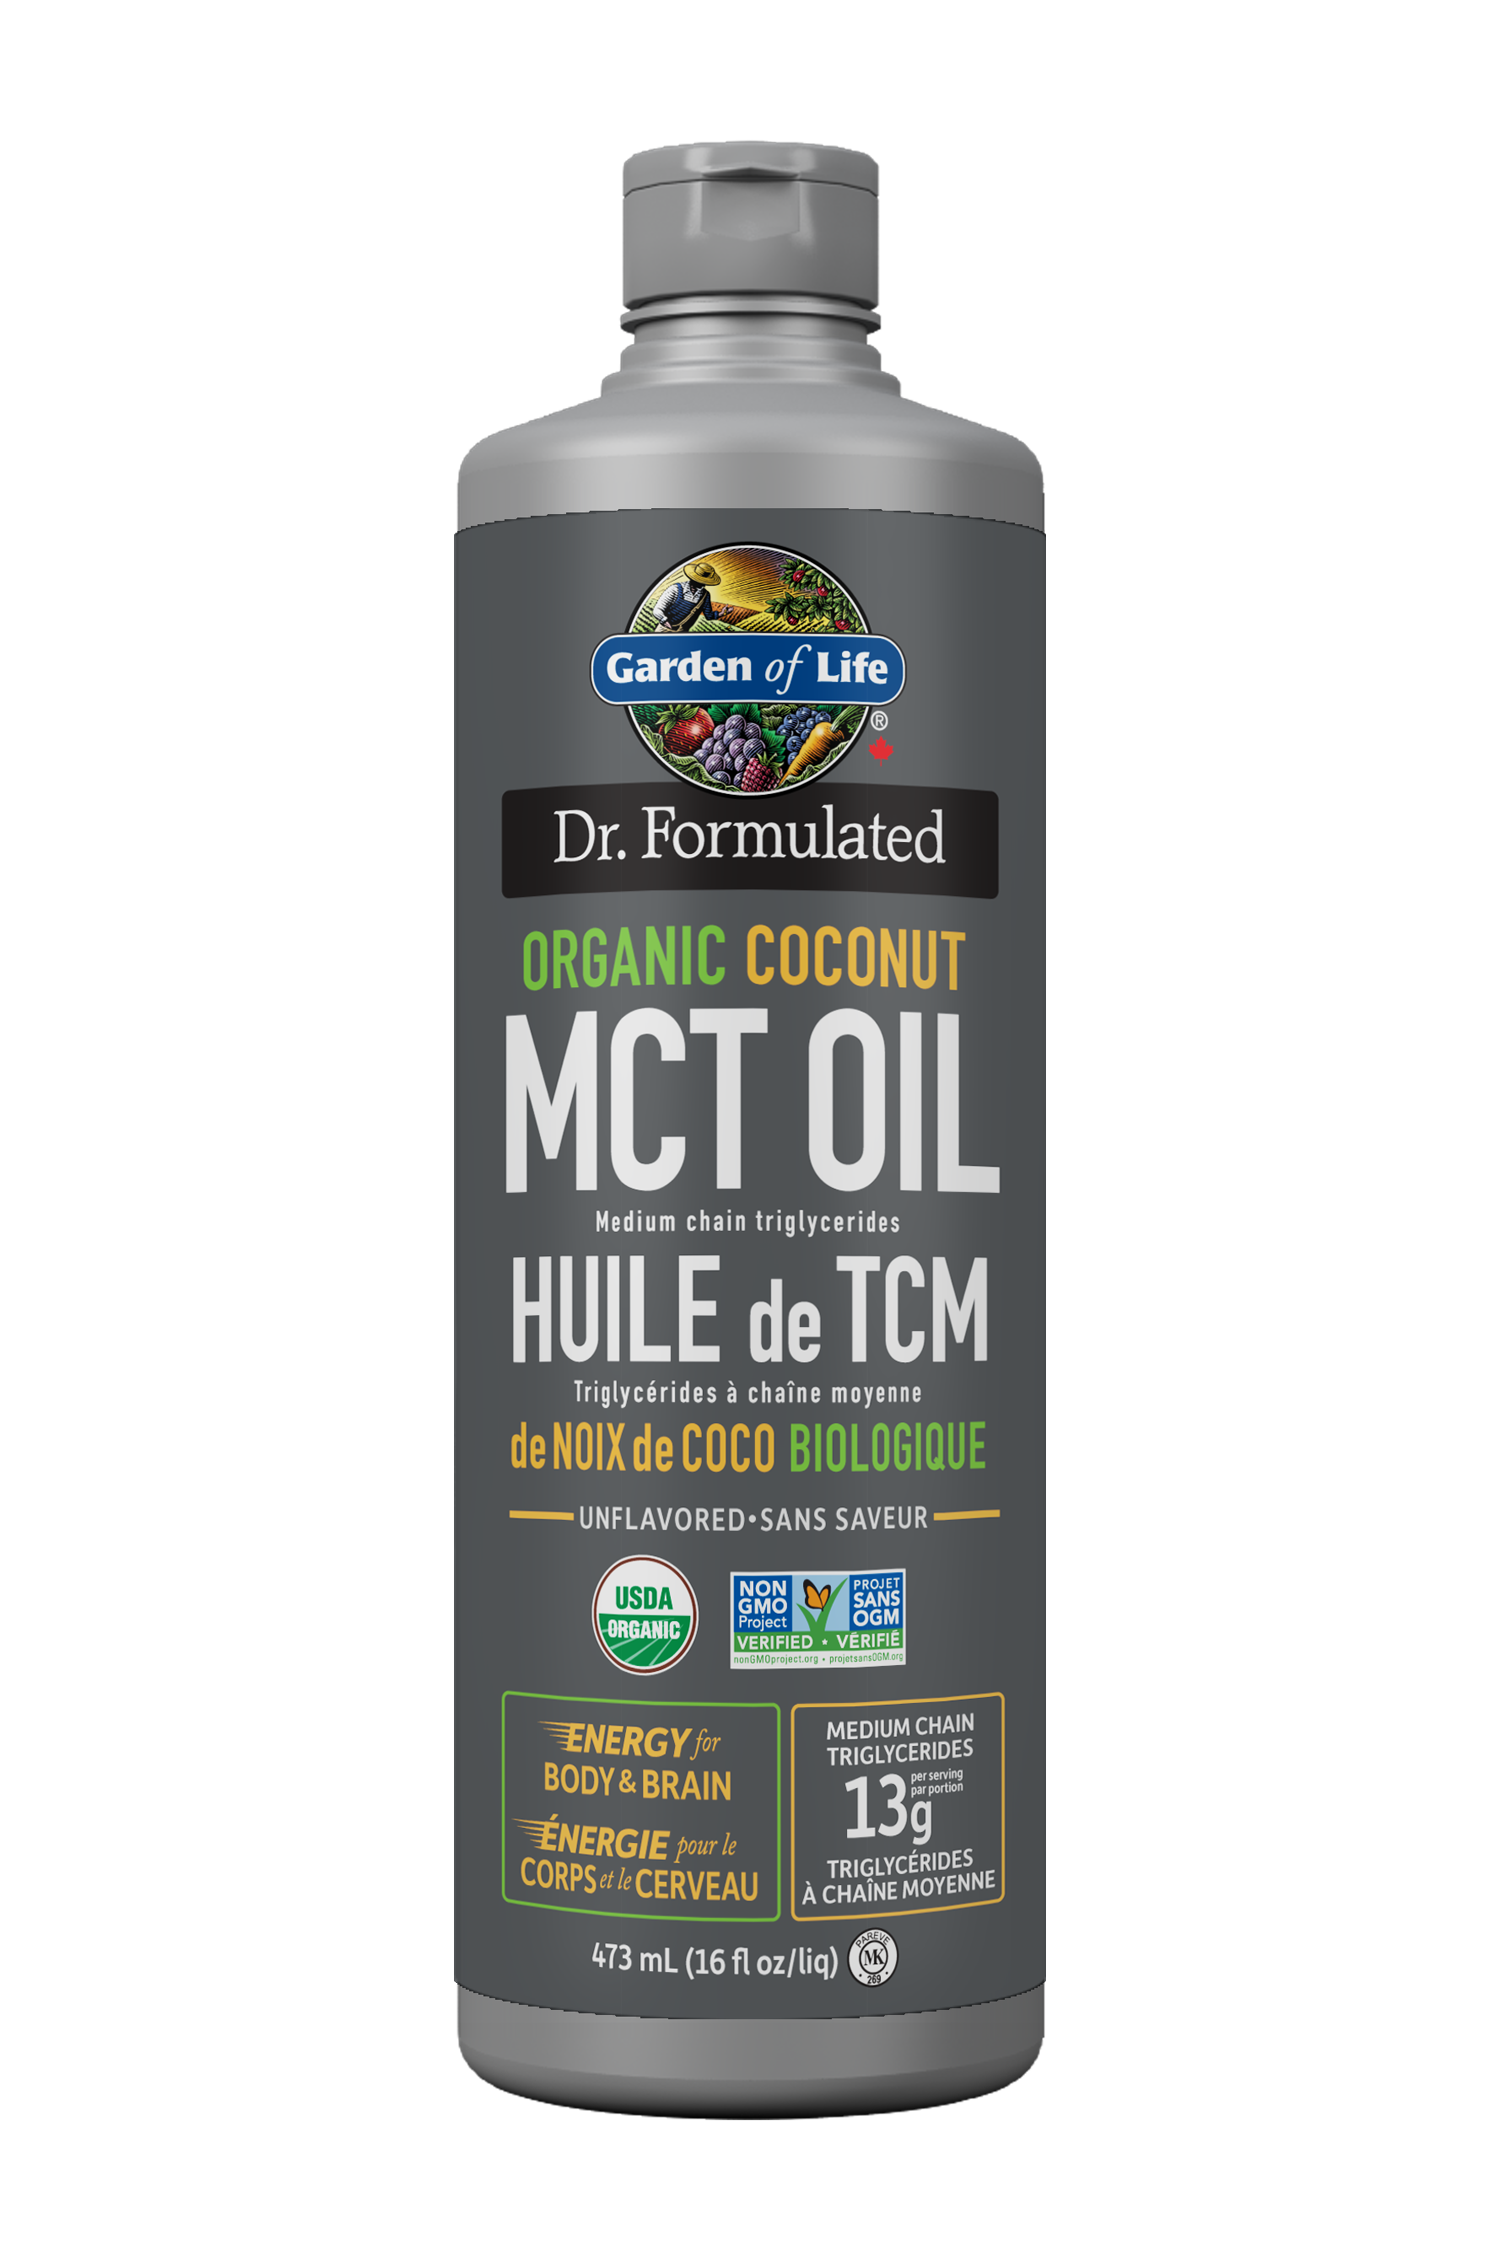 Garden of Life Dr. Formulated 100% Organic Coconut MCT Oil 473ml